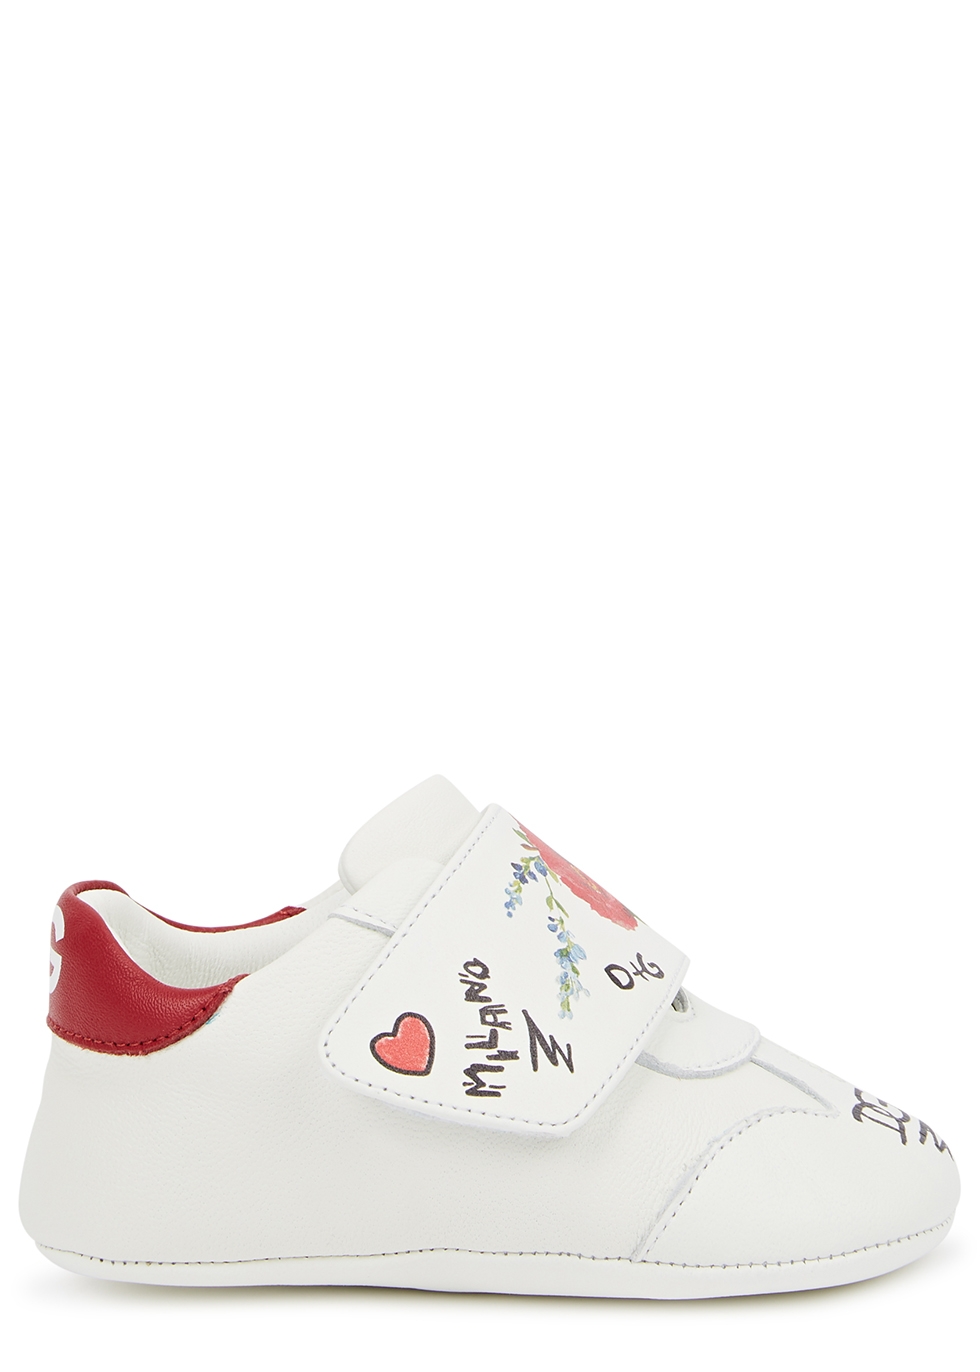 KIDS White printed leather sneakers